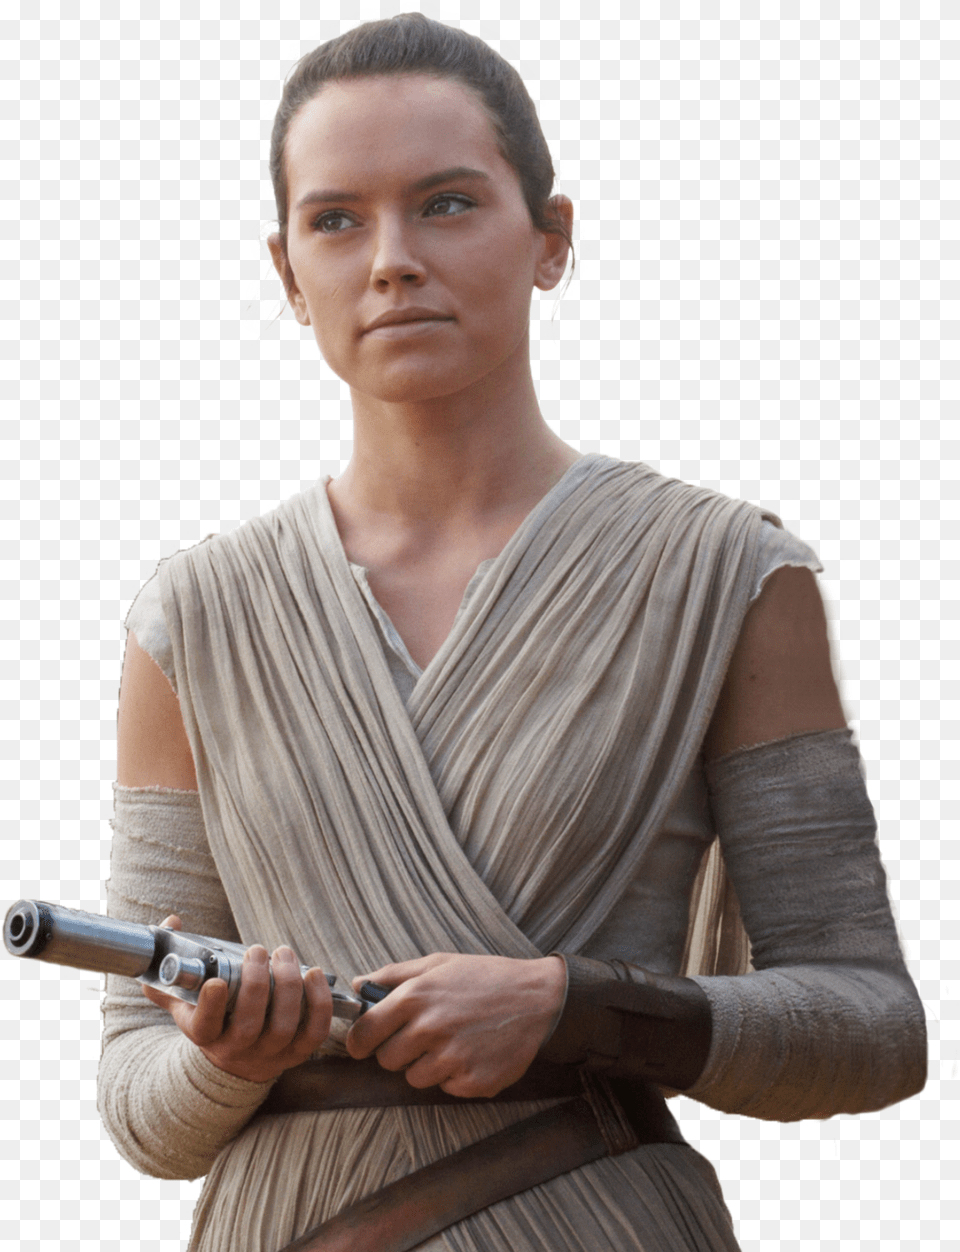 Rey Star Wars Picture Star Wars Rey Hd, Adult, Weapon, Portrait, Photography Png